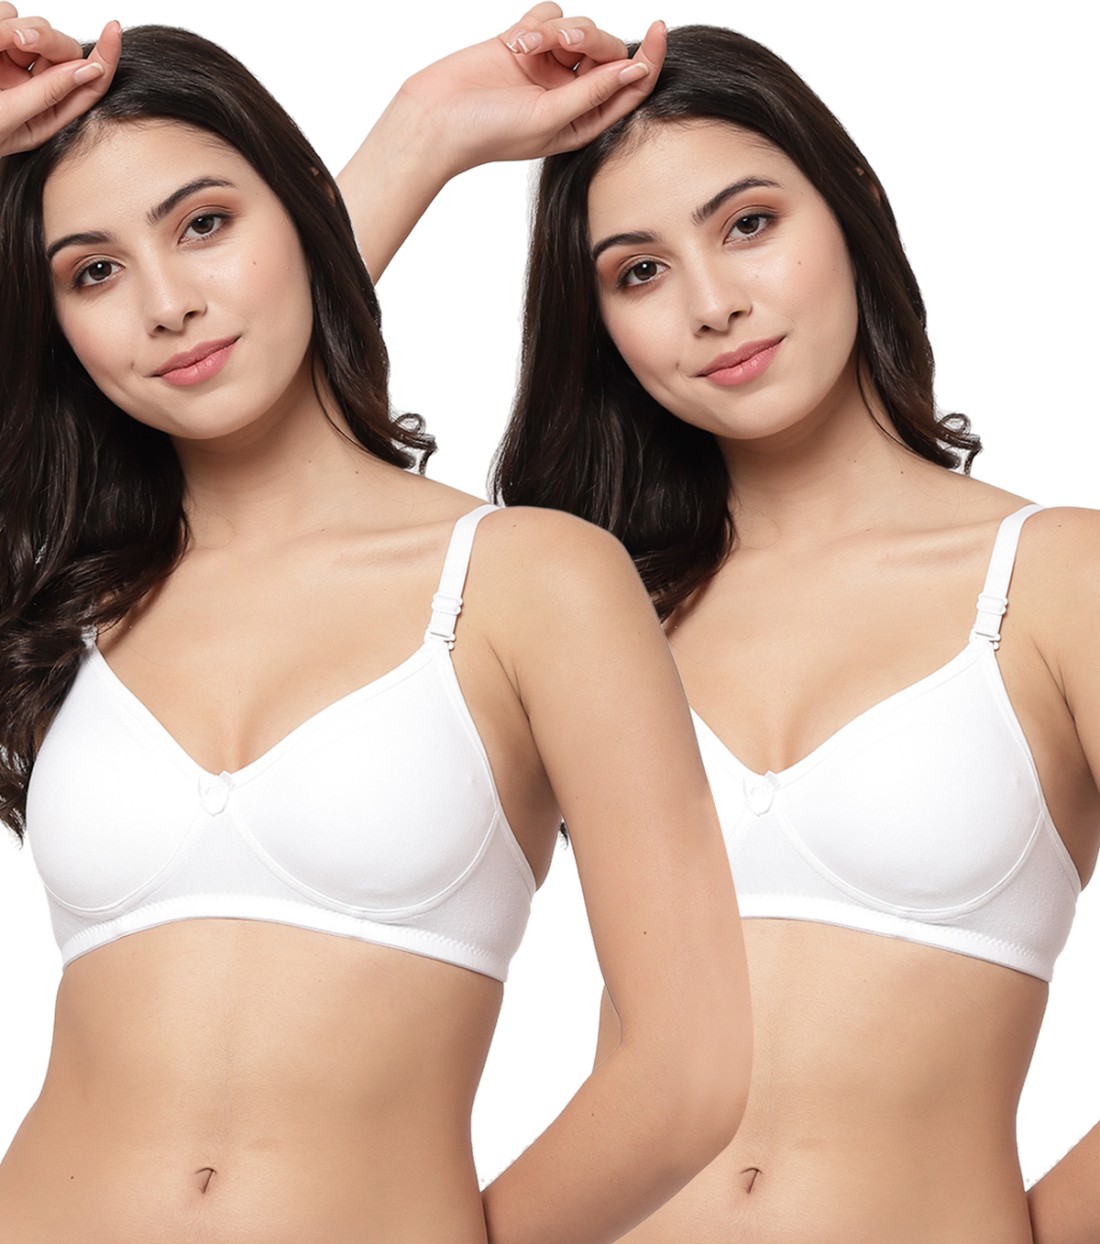 T-shirt bras (Removable straps) for women, Buy online